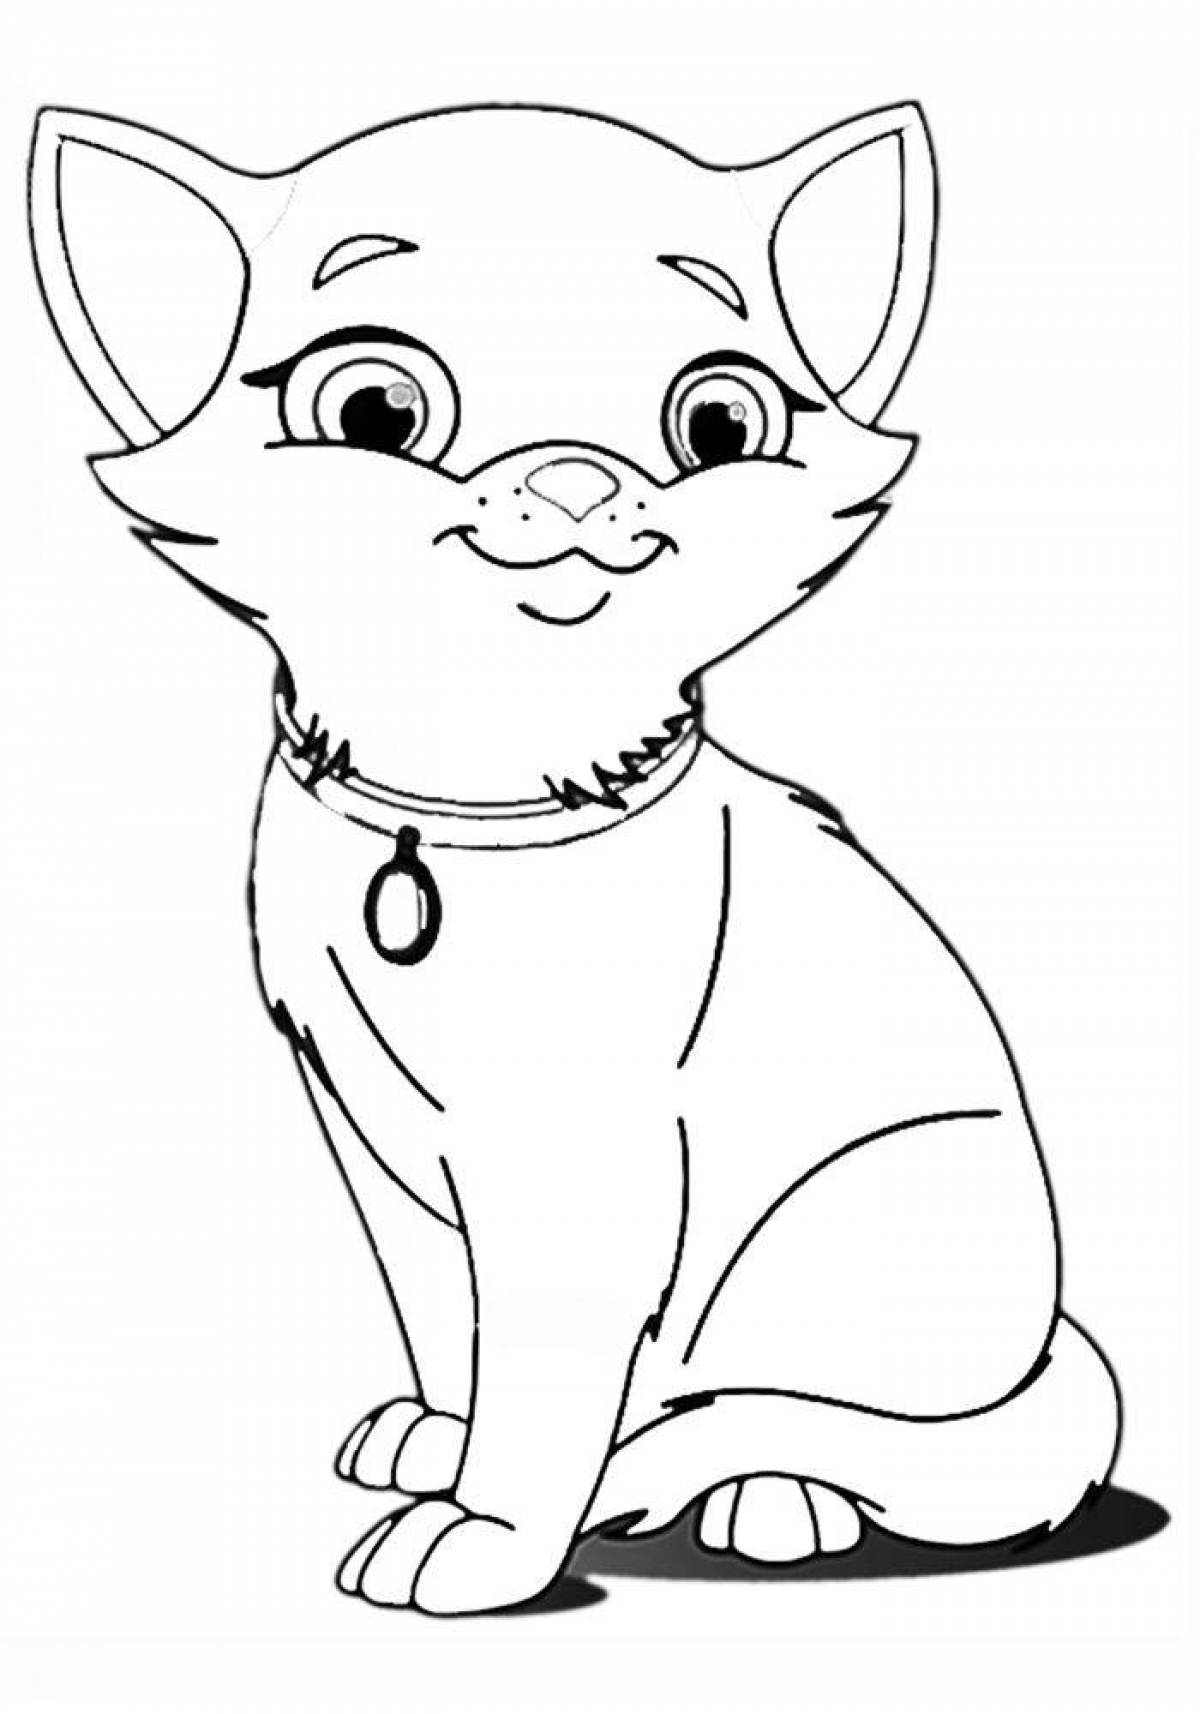 Cute cats coloring pages for kids